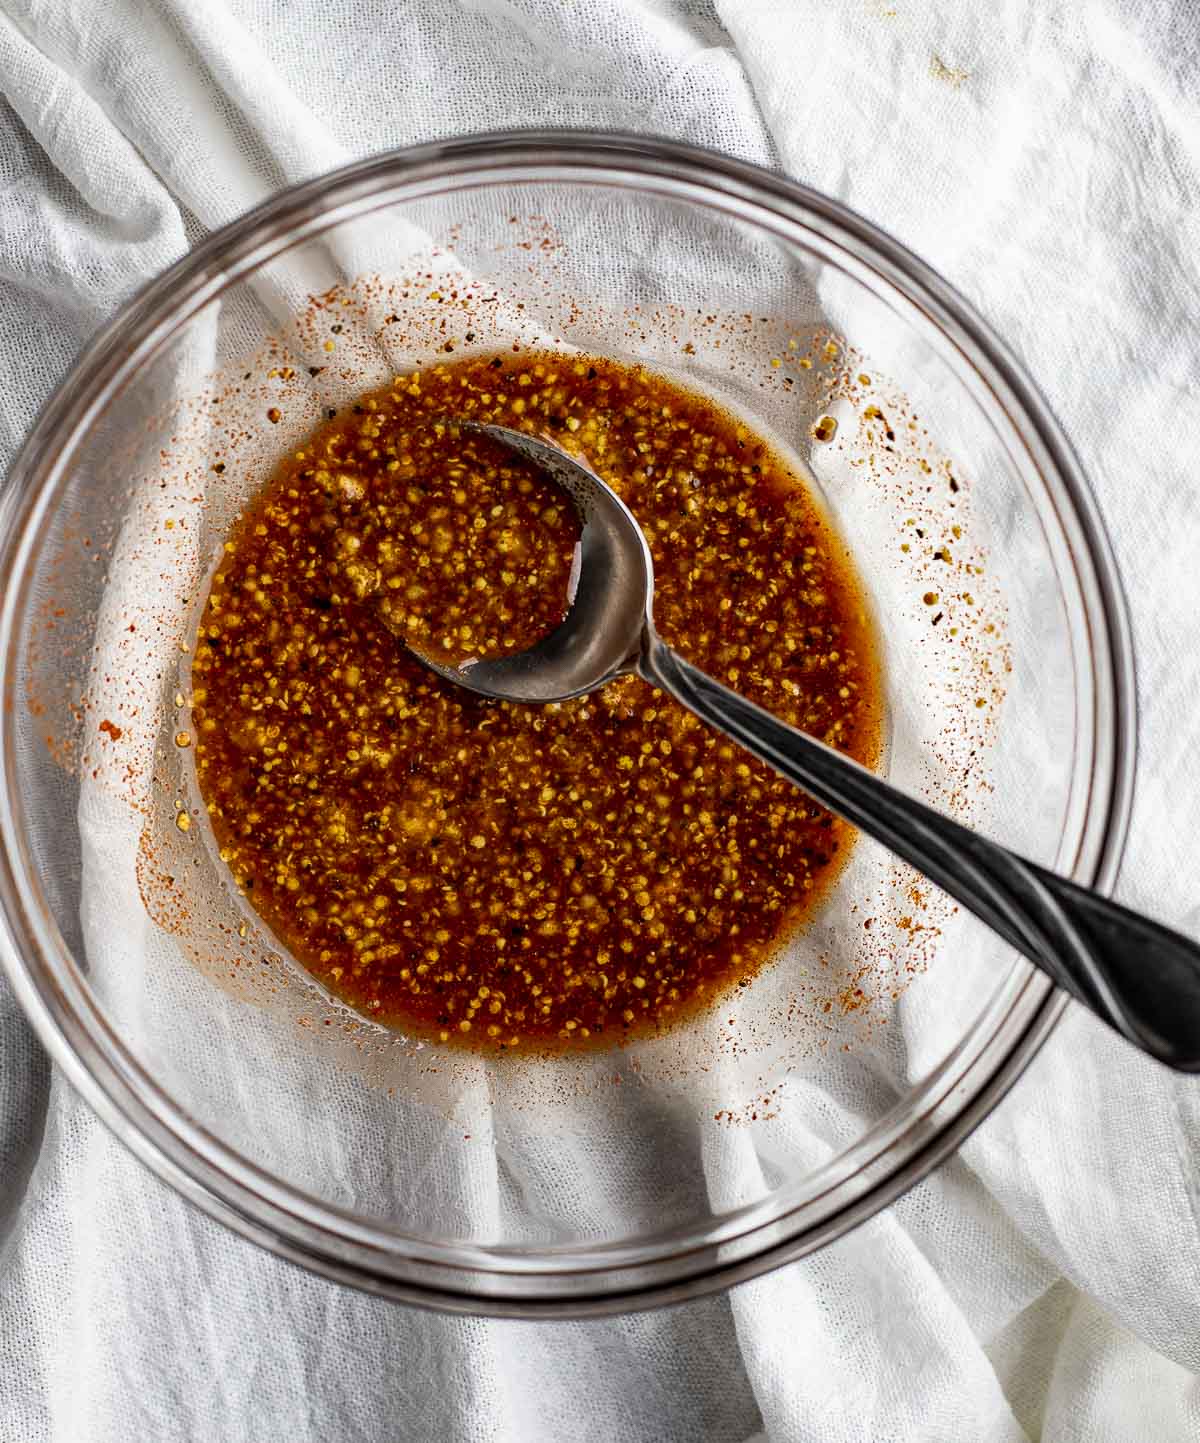 Sauce ingredients stirred together in a glass bowl with a spoon.